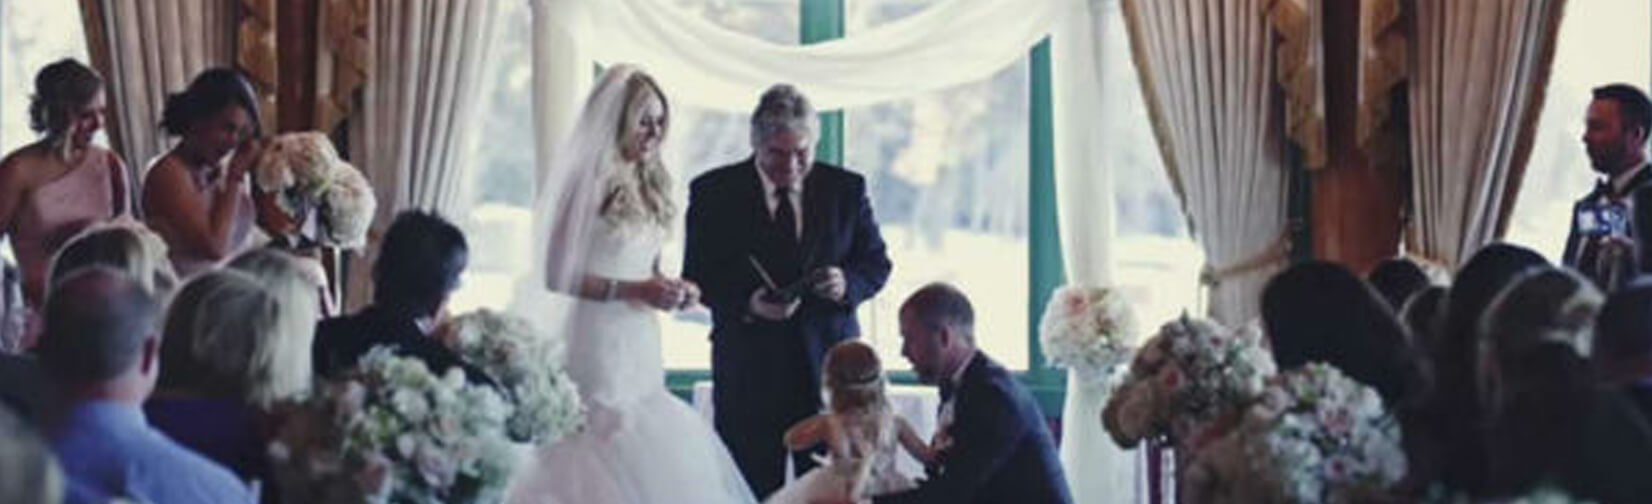 Wedding vows should include Children as well as partners